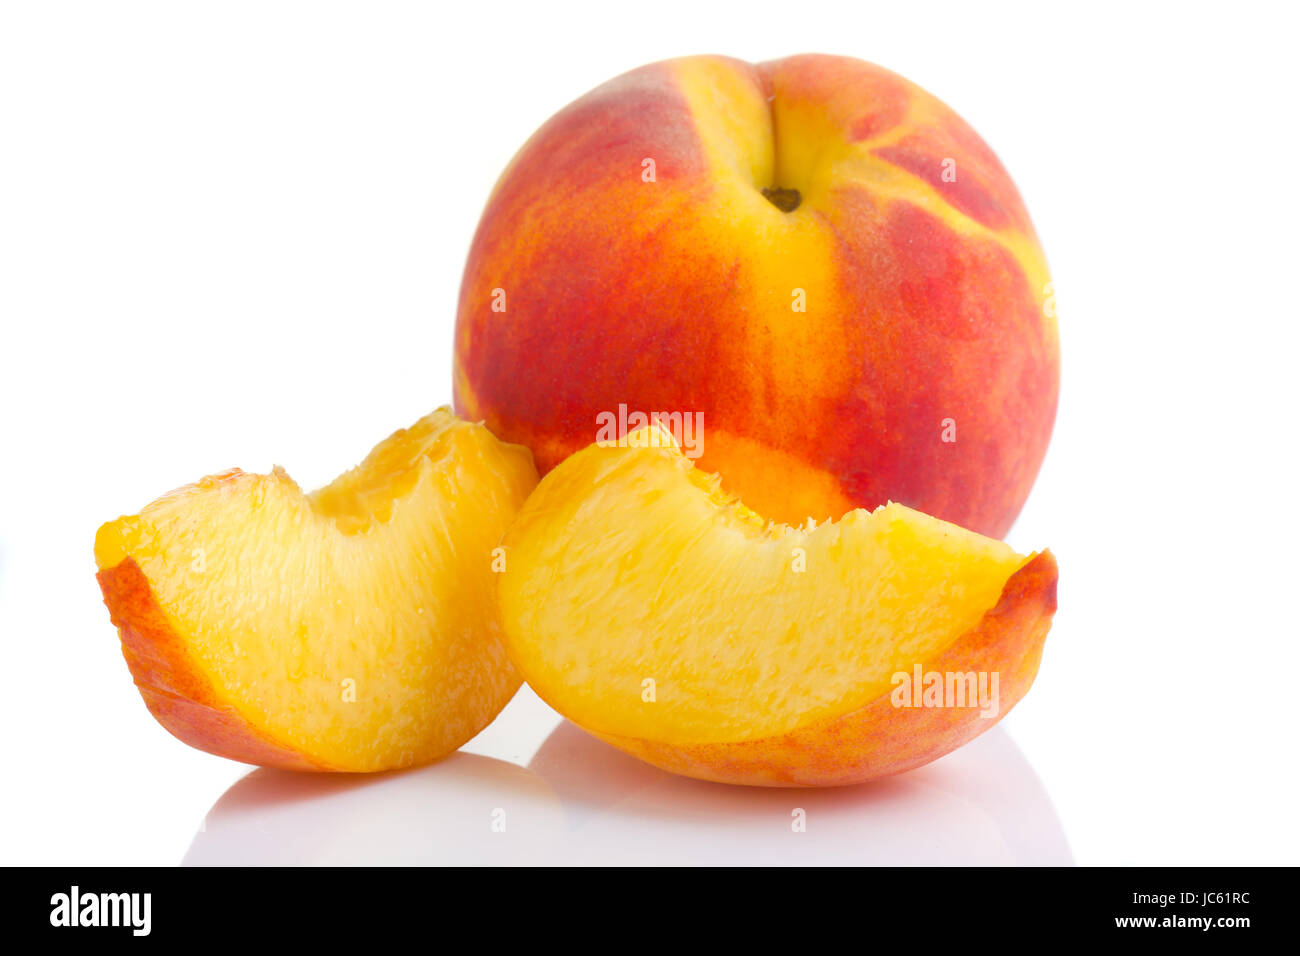 Ripe peach fruit with slices isolated on white background Stock Photo